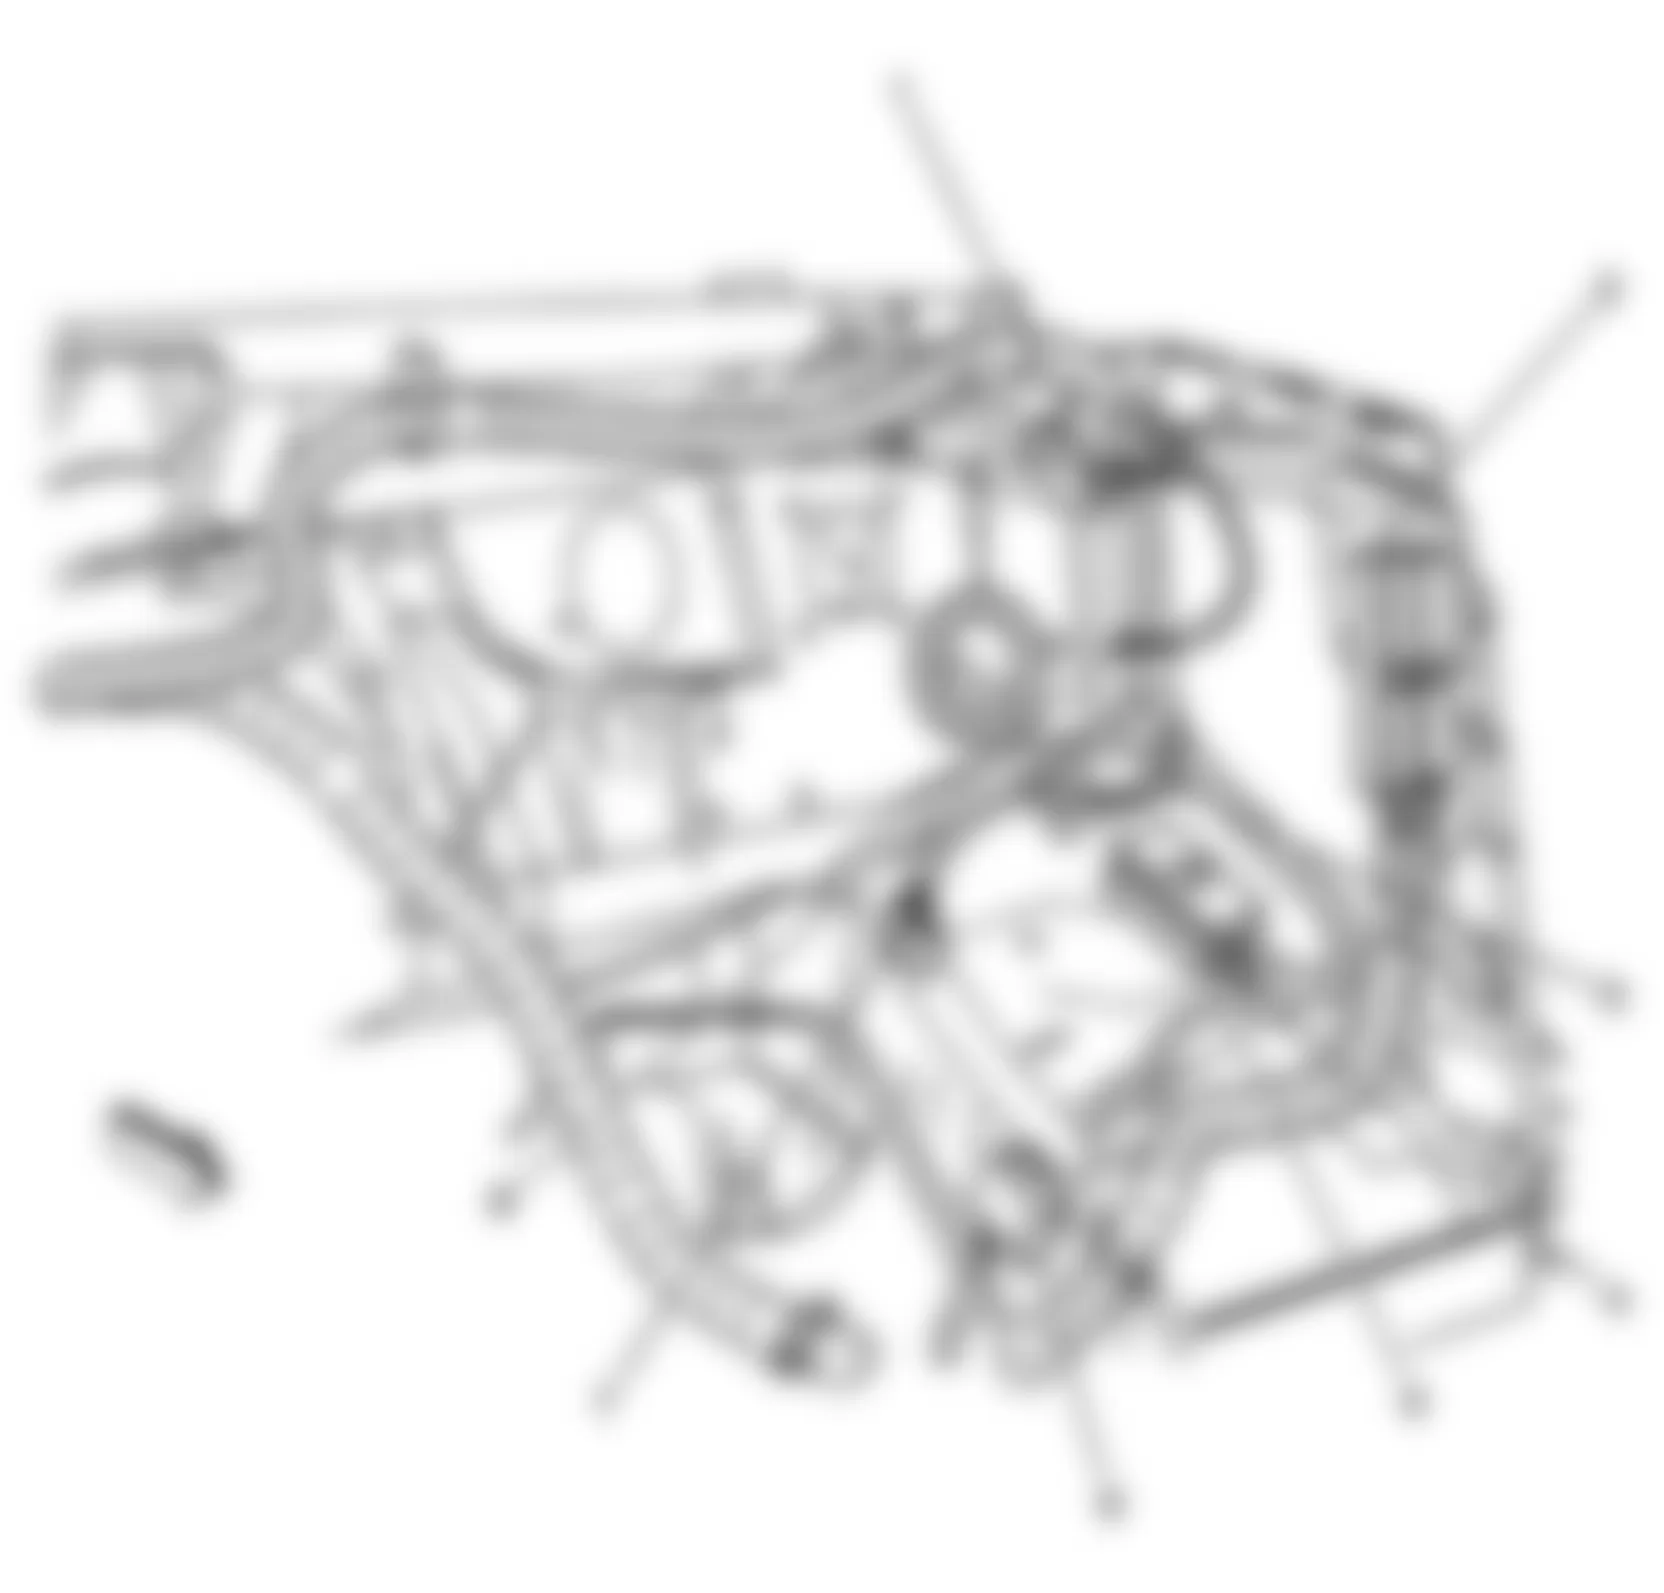 GMC Savana H1500 2010 - Component Locations -  Left Rear Of Engine Compartment